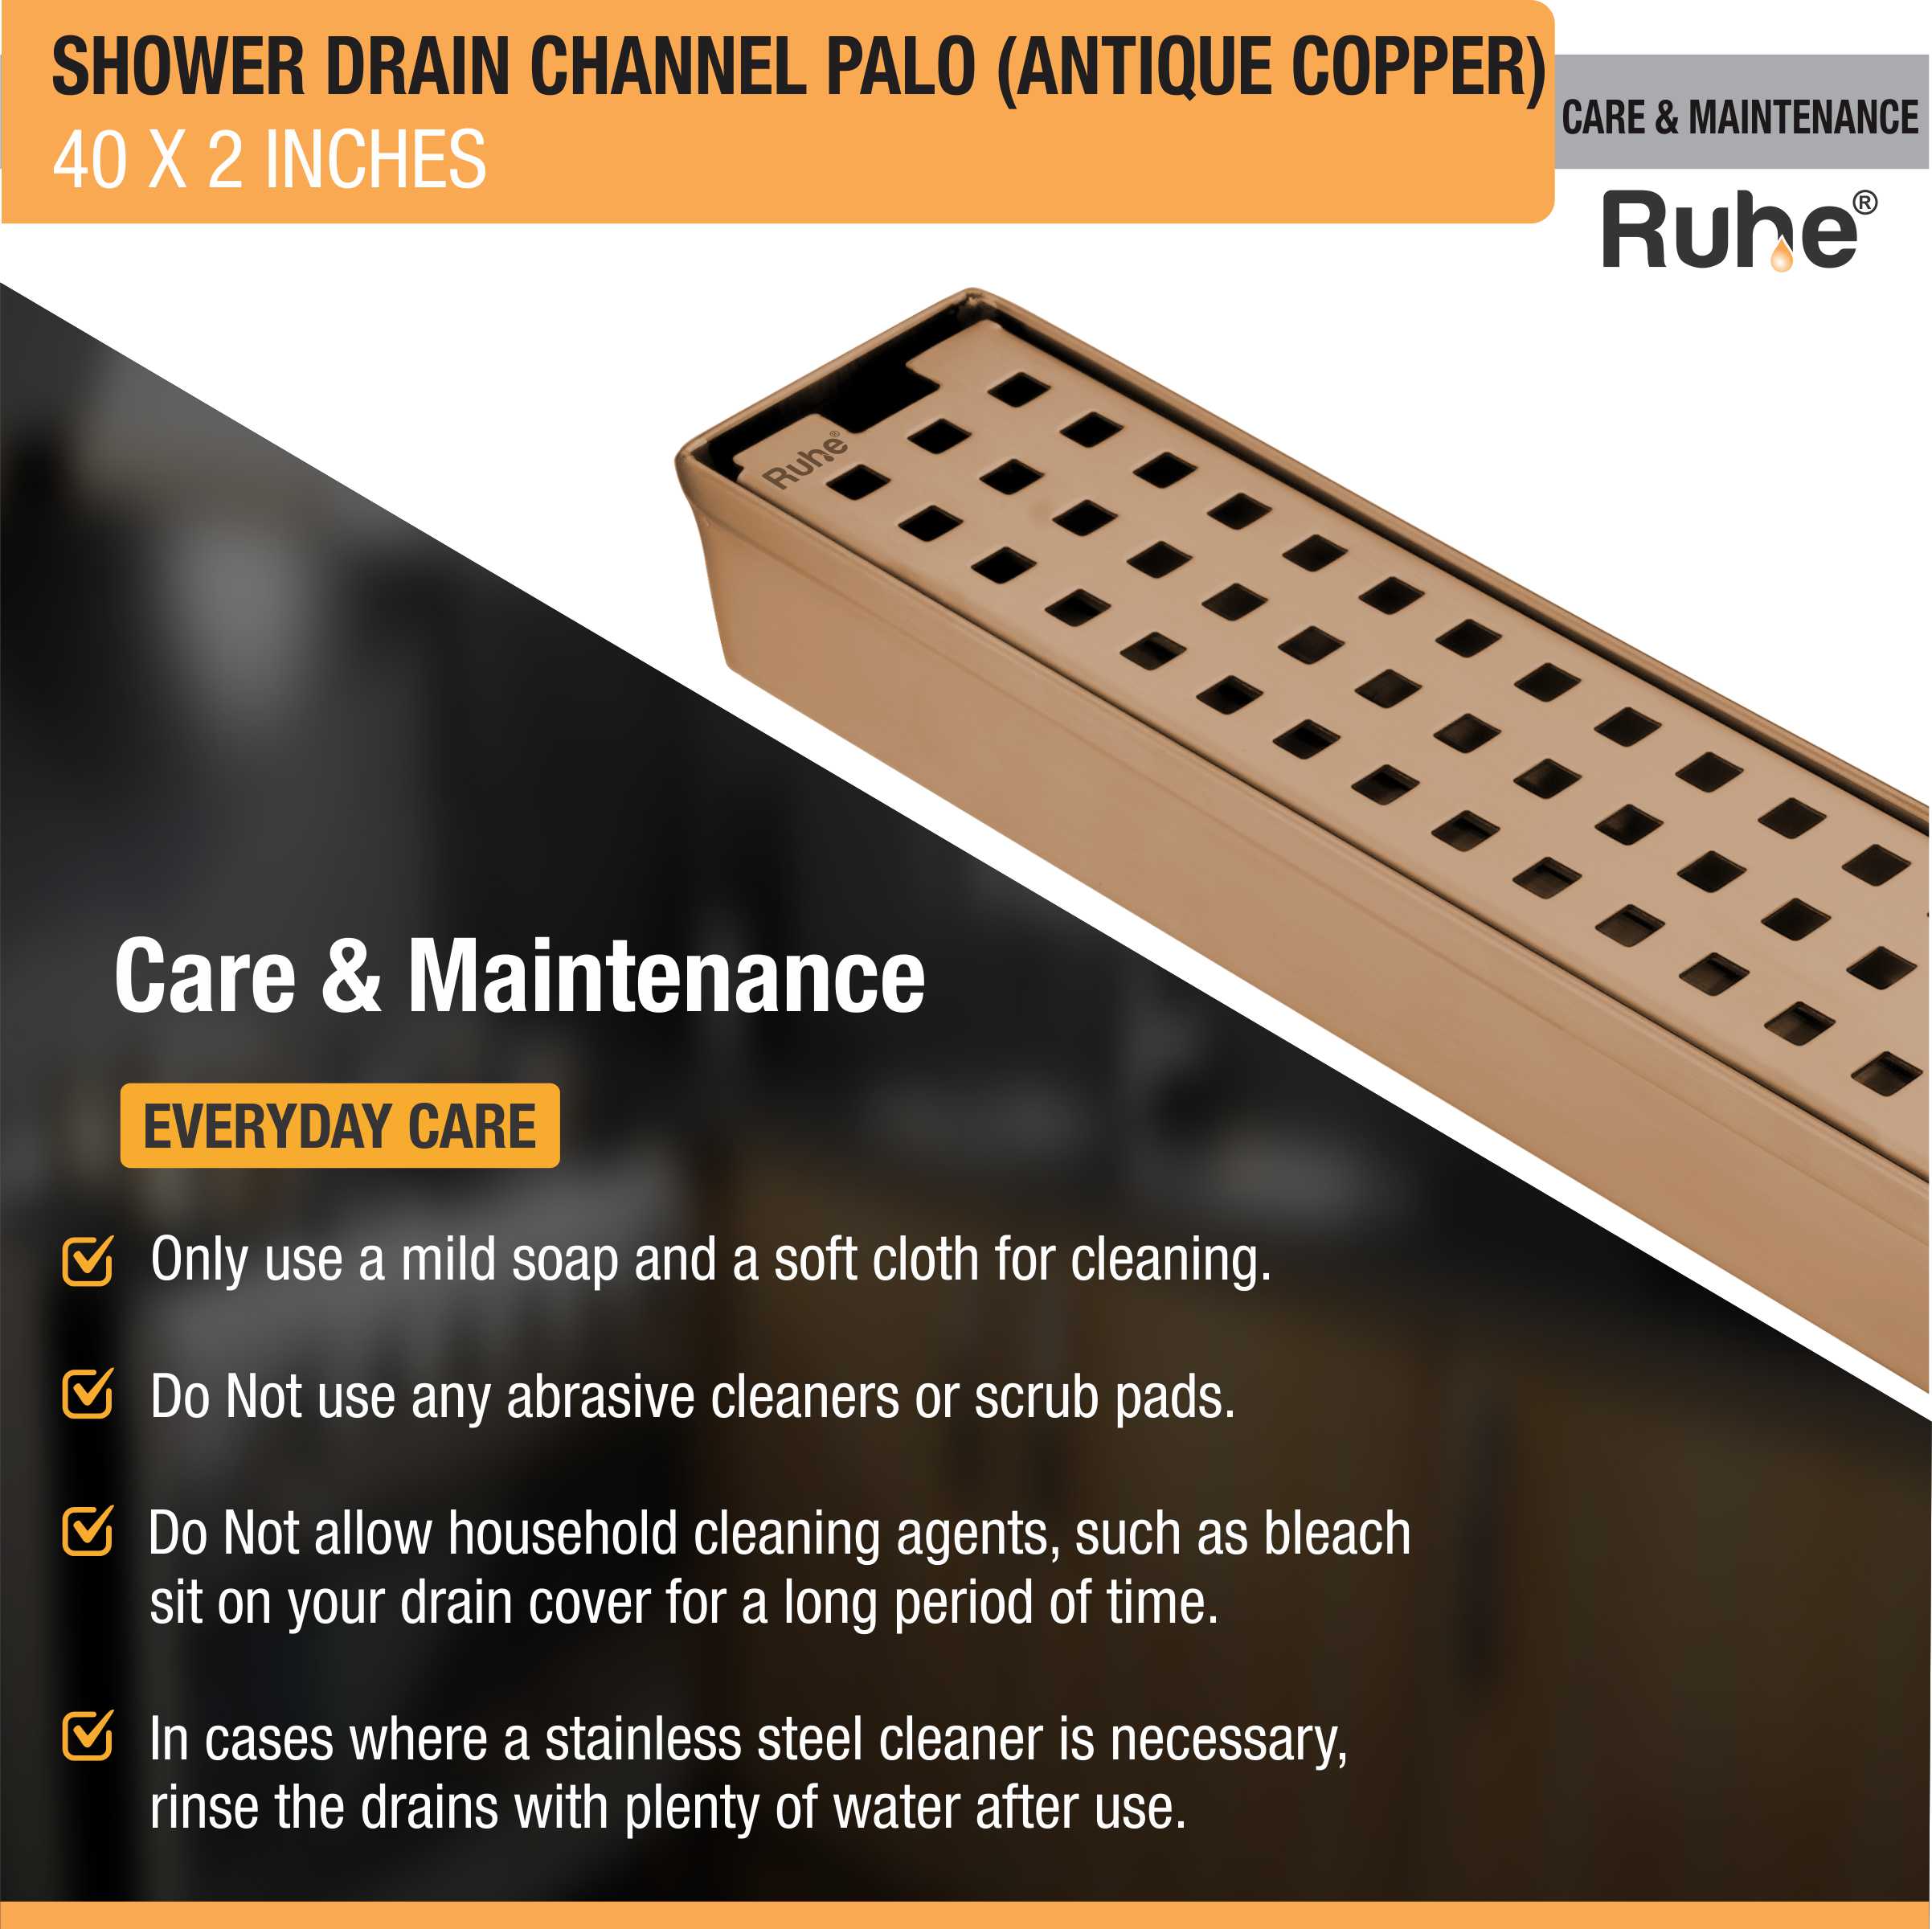 Palo Shower Drain Channel (40 x 2 Inches) ROSE GOLD/ANTIQUE COPPER care and maintenance